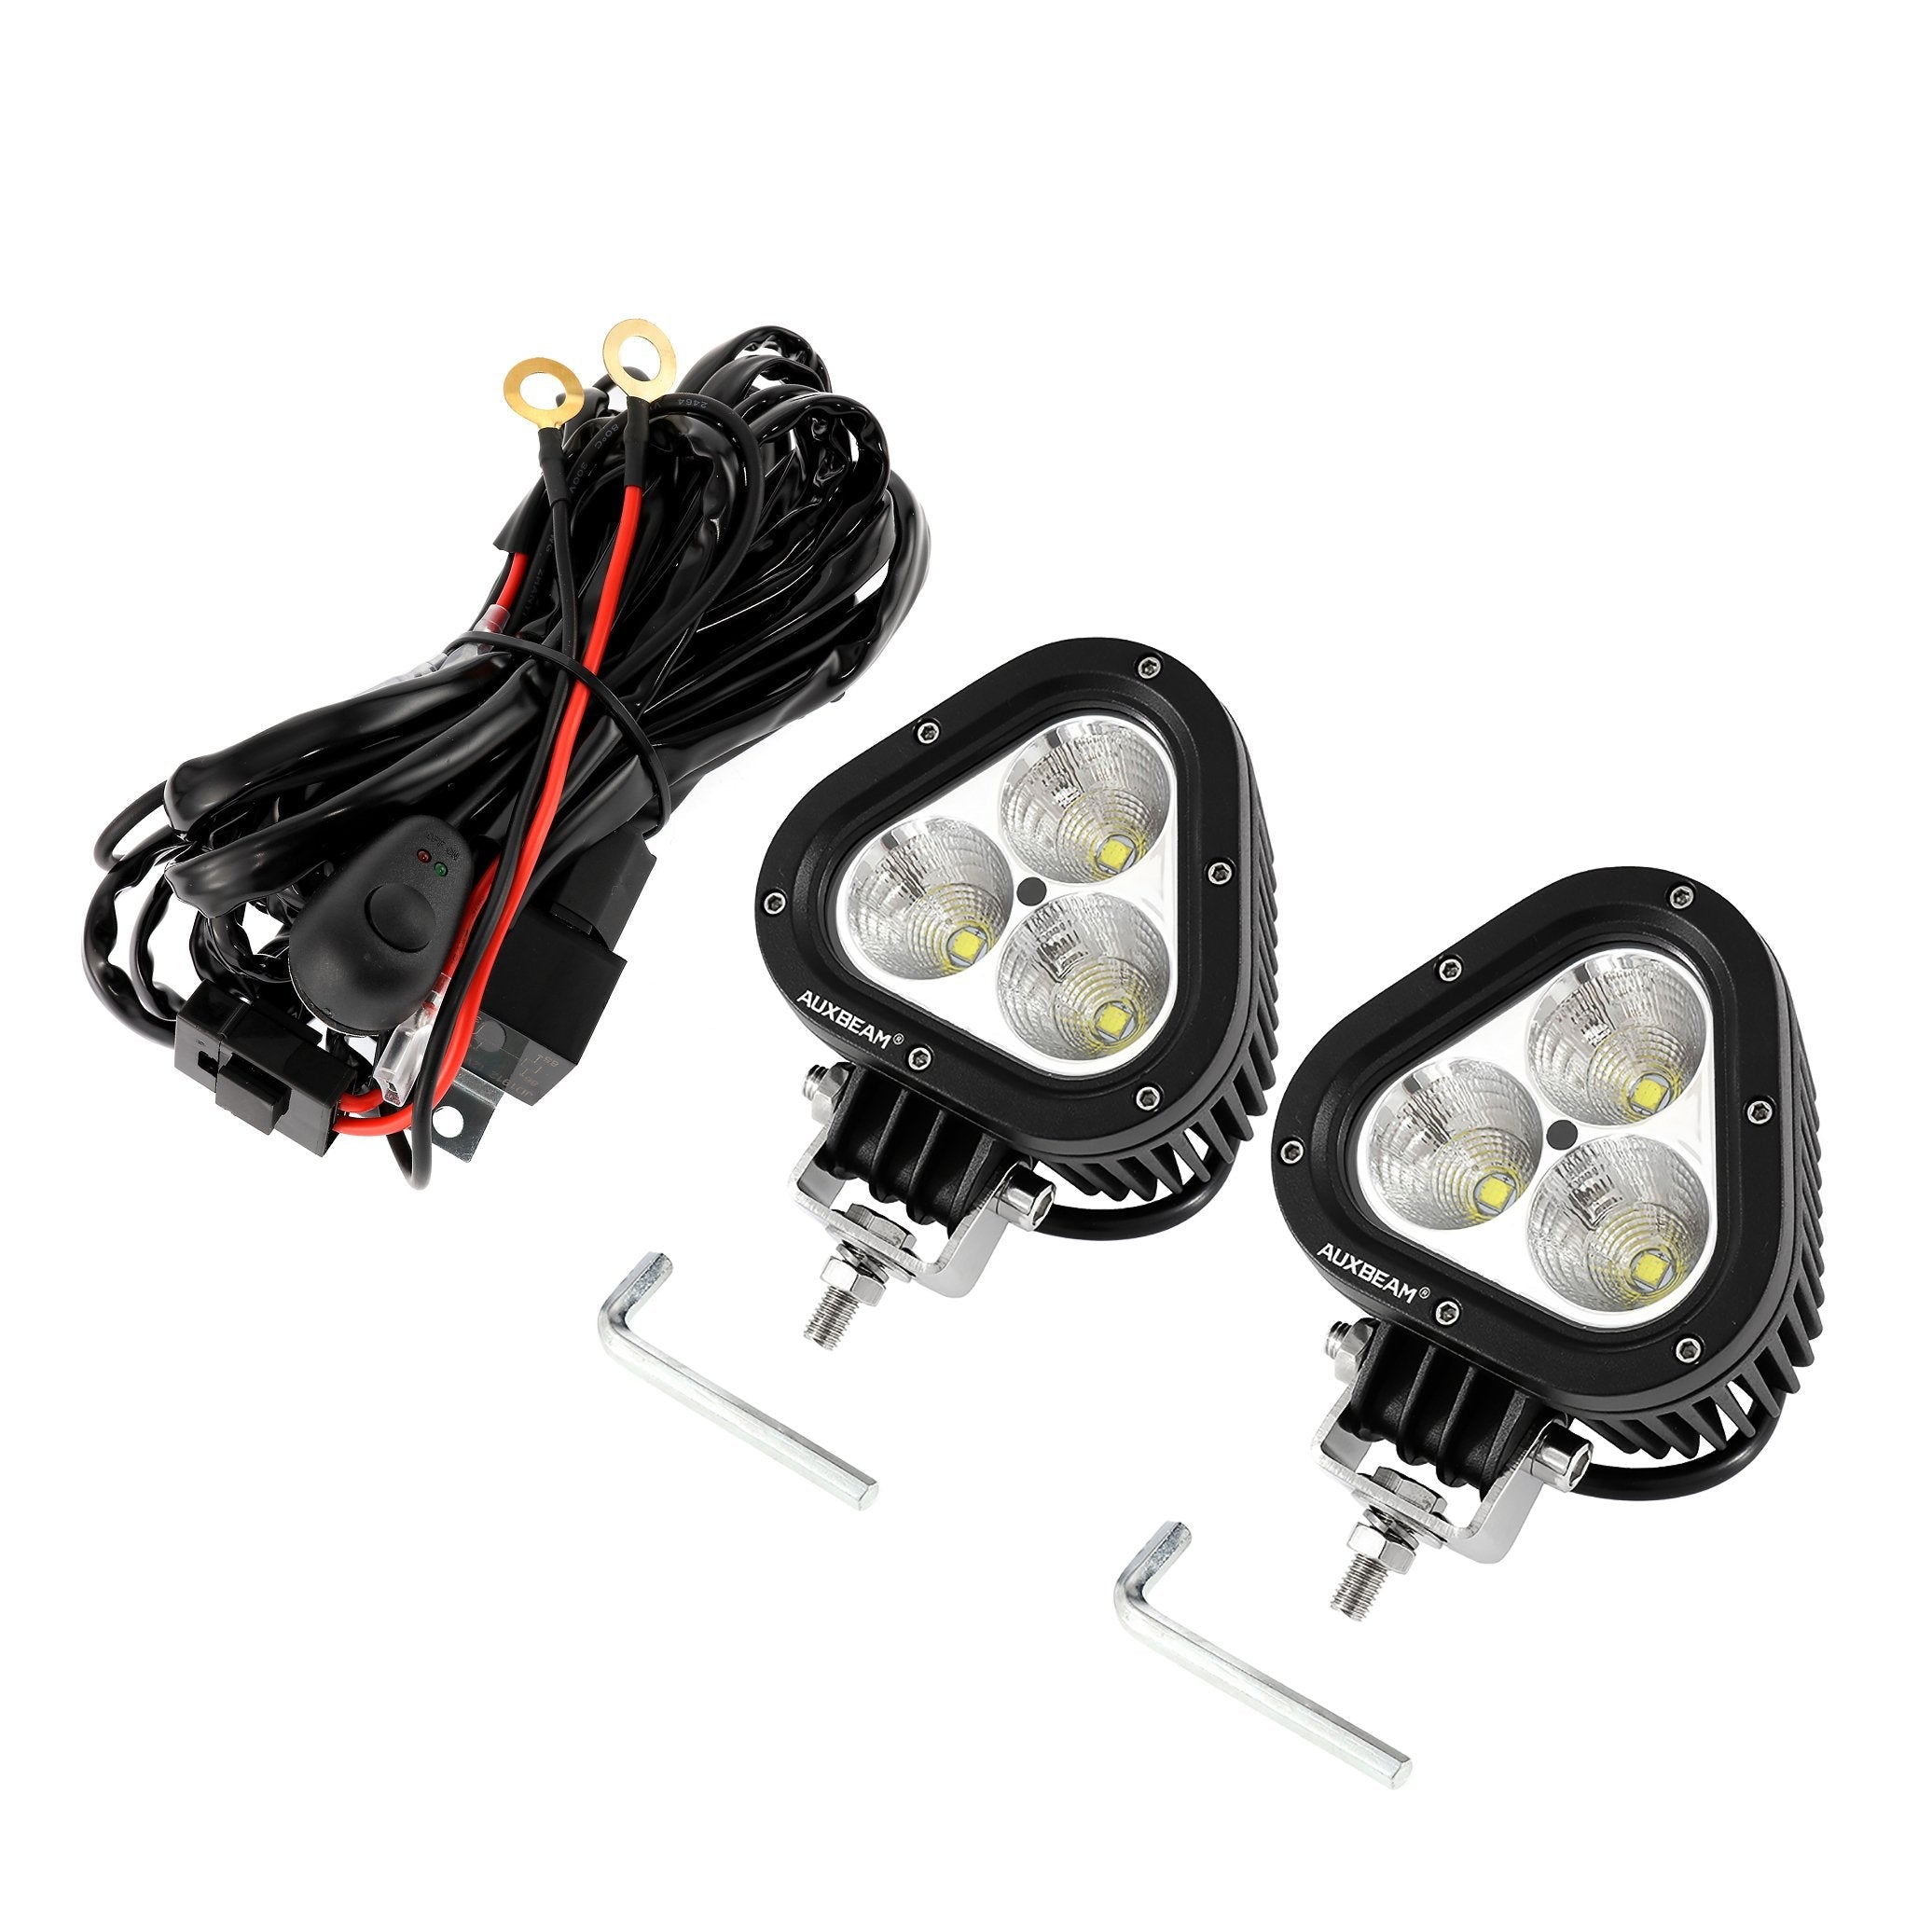 4" Triangle LED Pods Lights Spot White/Yellow with wiring harness for SUV ATV UTV Trucks Pickup Boat